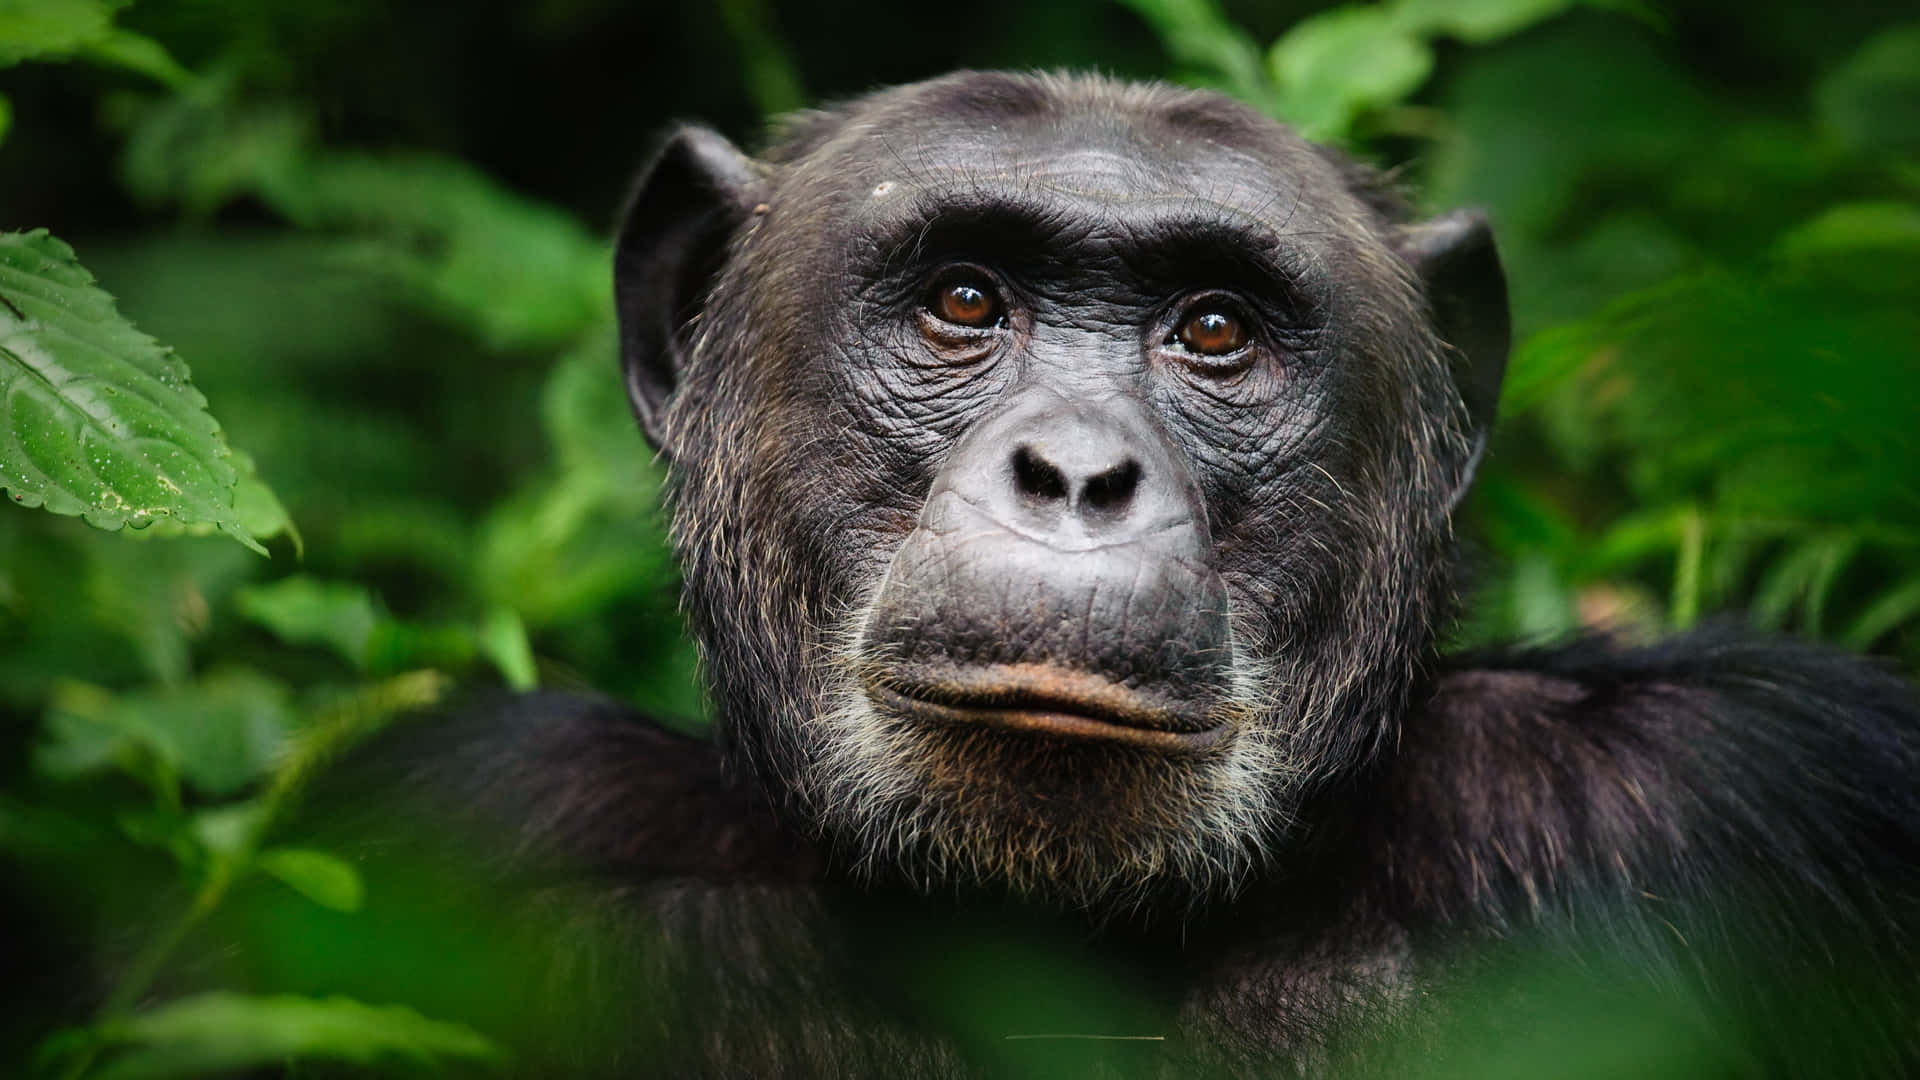 A Chimpanzee Is Staring At The Camera In The Jungle